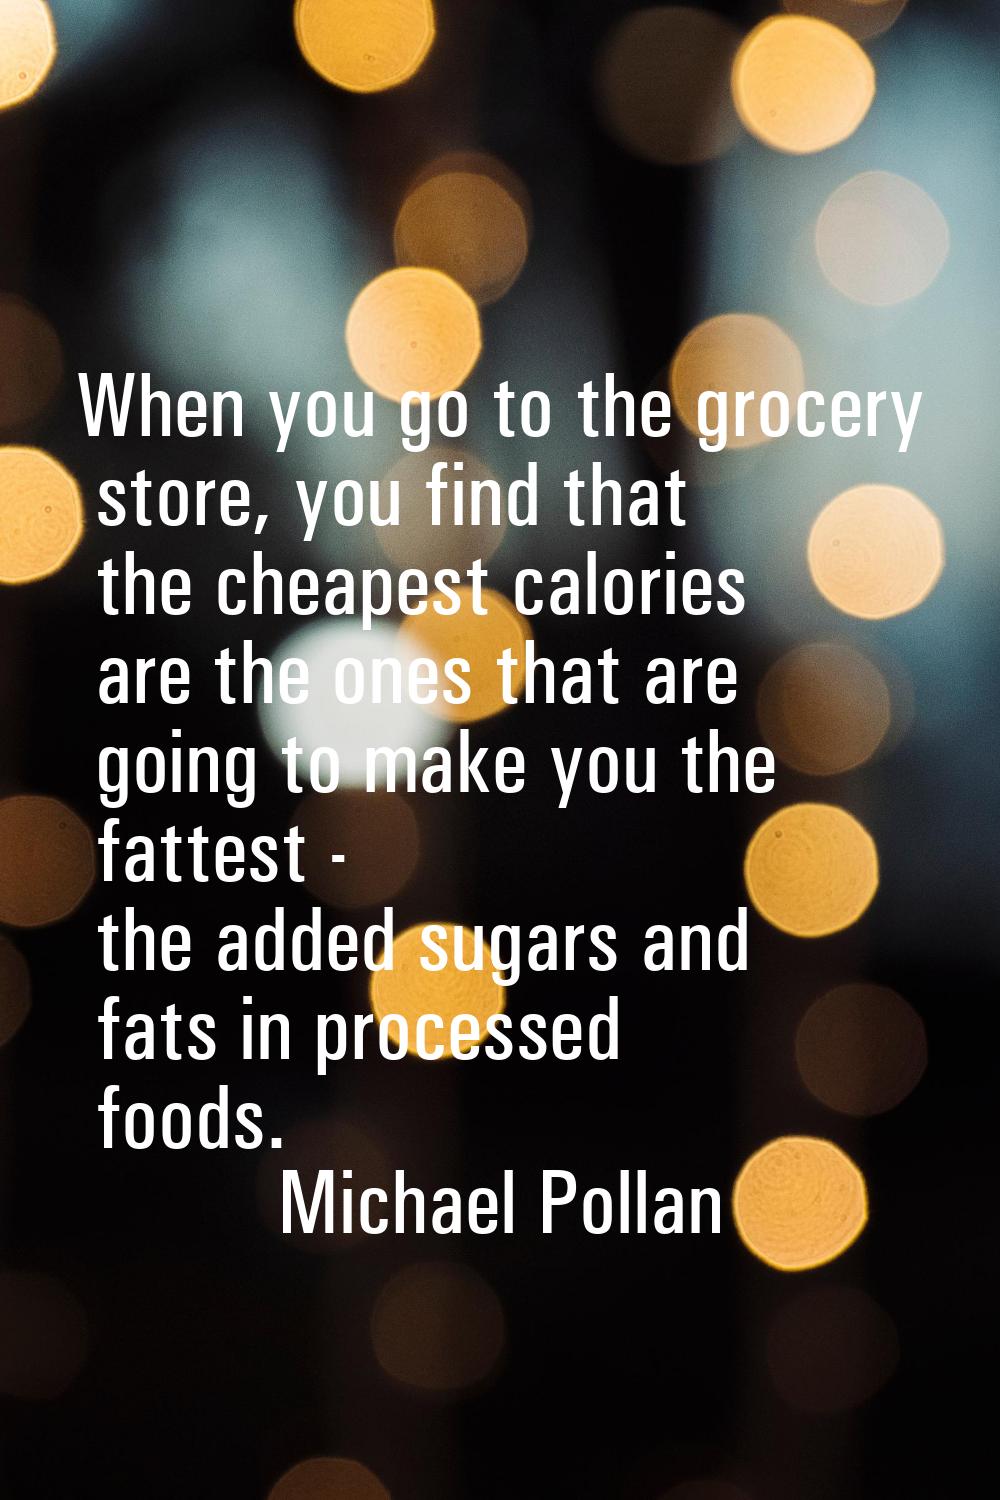 When you go to the grocery store, you find that the cheapest calories are the ones that are going t